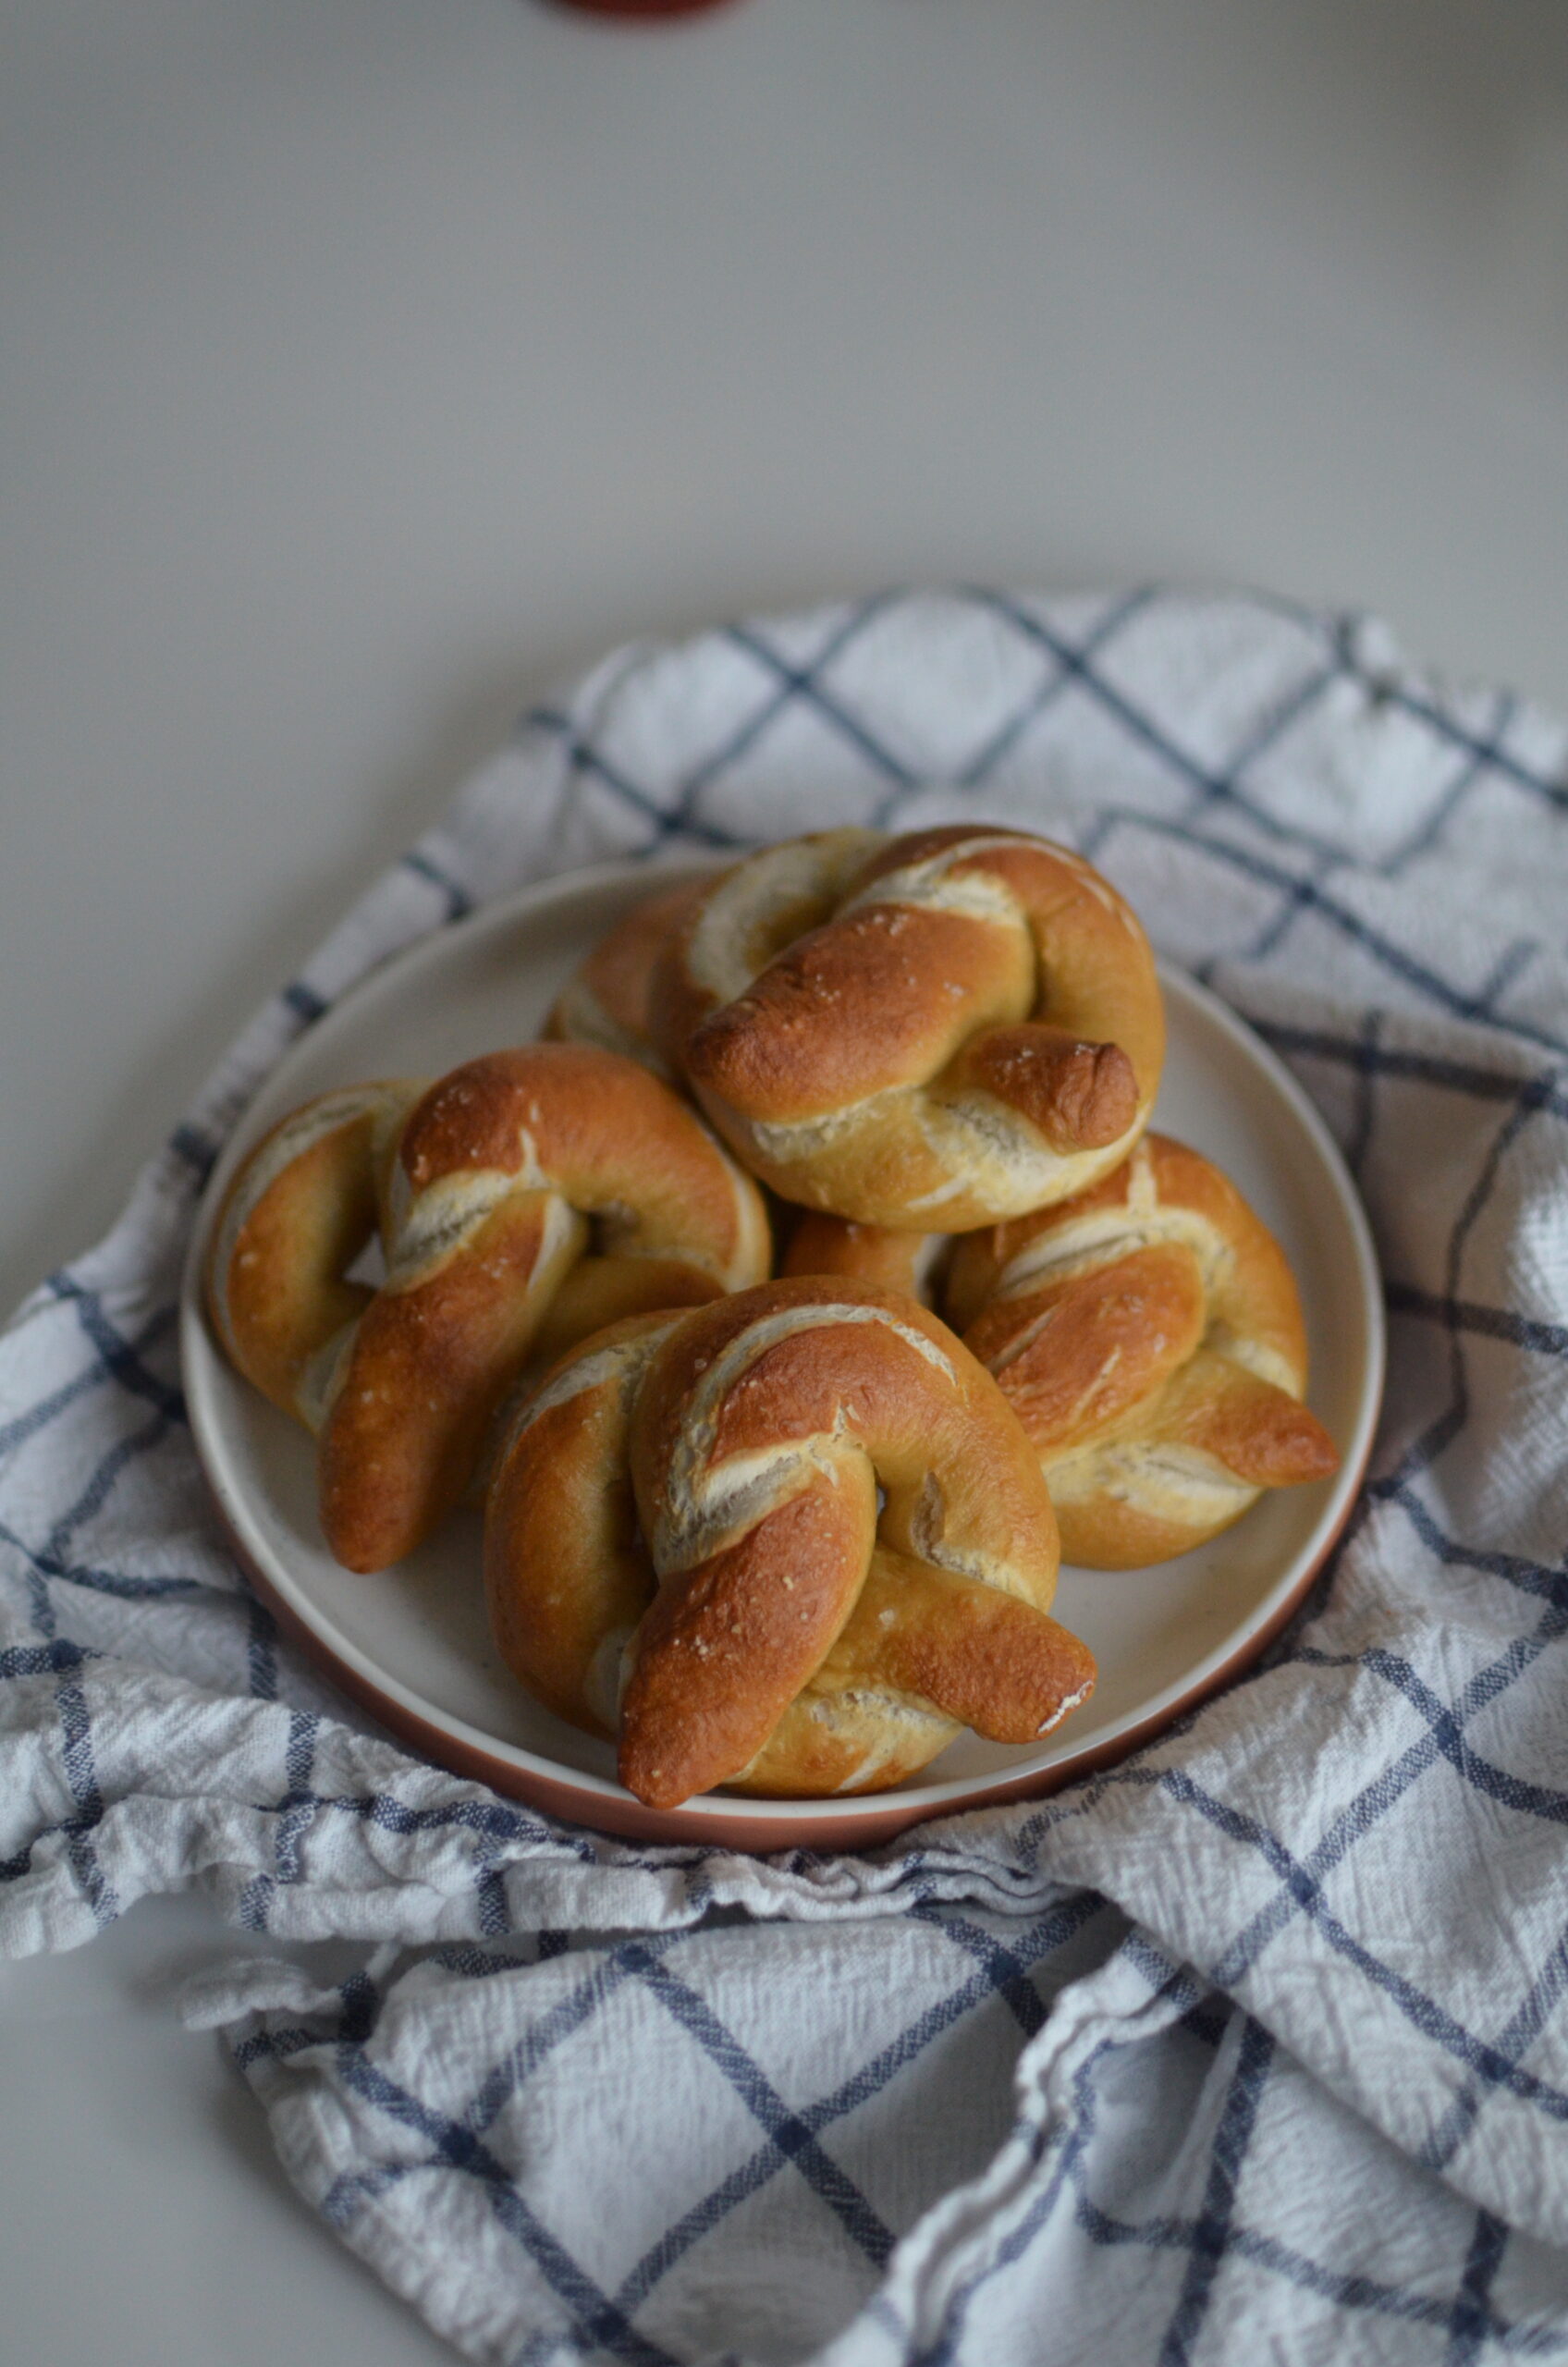 Cheer on the 49ers or the Chiefs and snack on these Soft Pretzels for an undeniably delicious Super Bowl app.